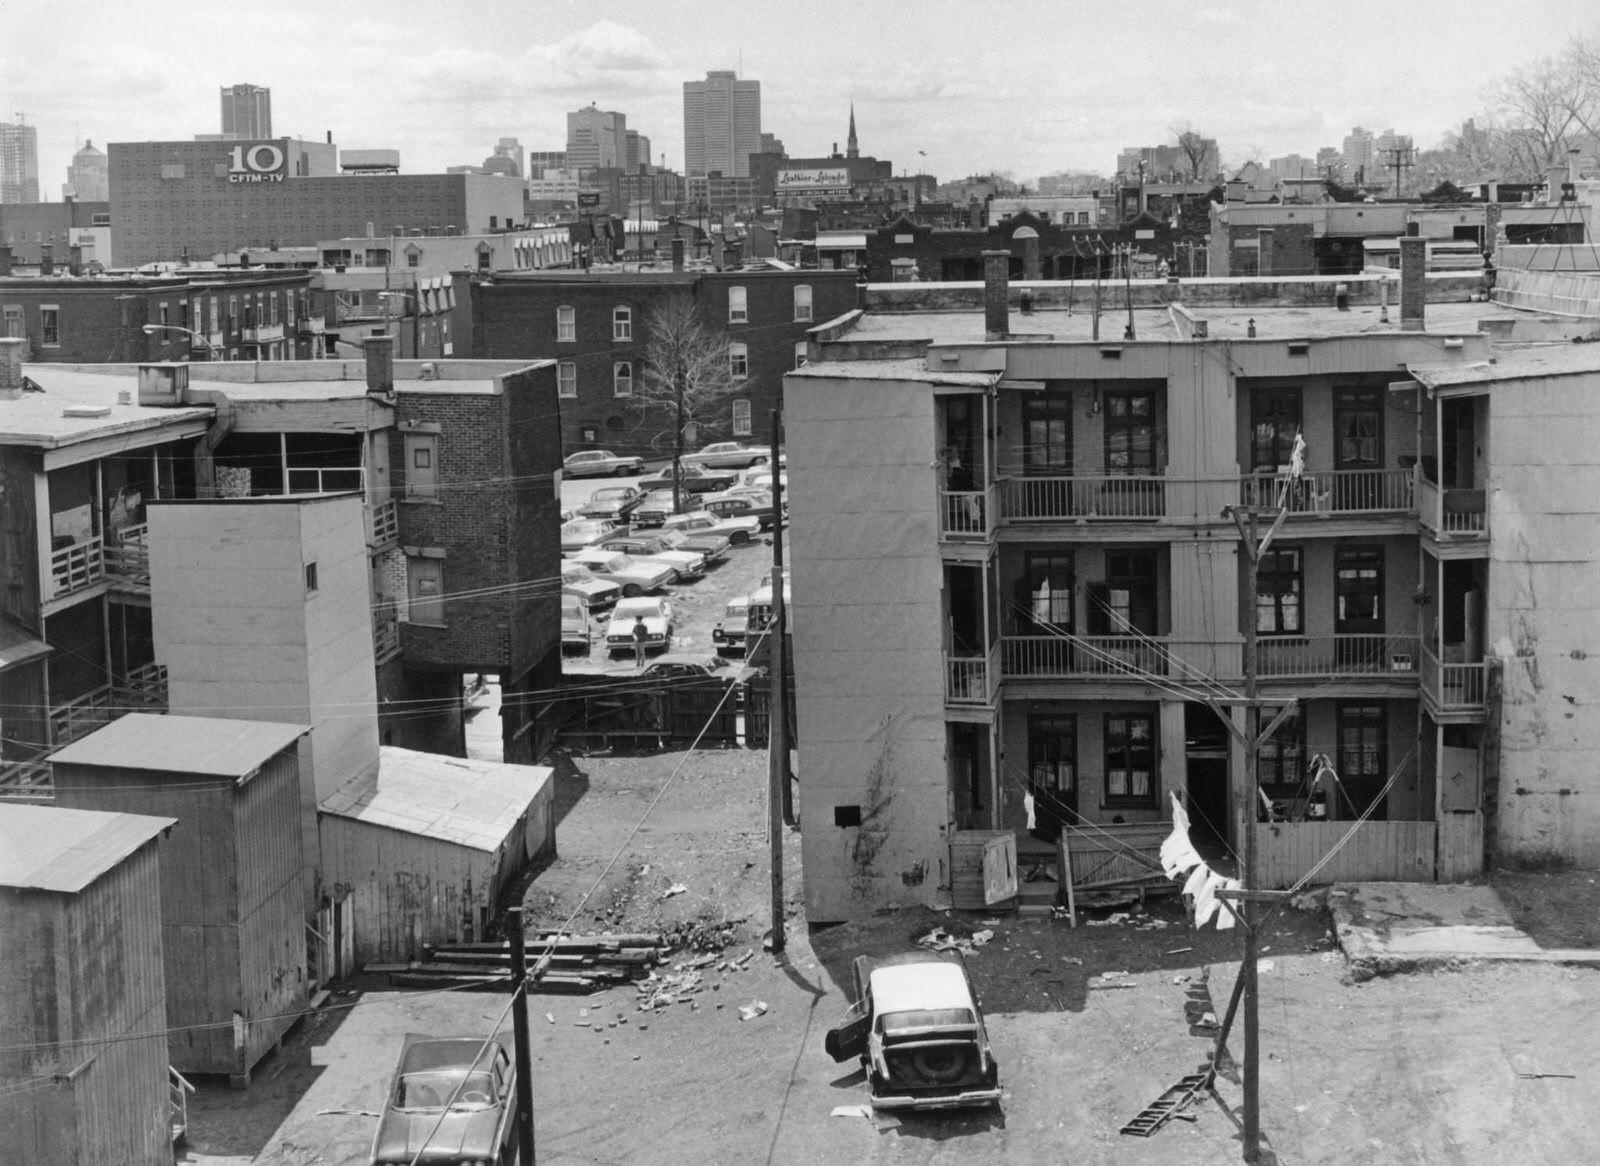 View of suburb to city center, Montreal, 1960s